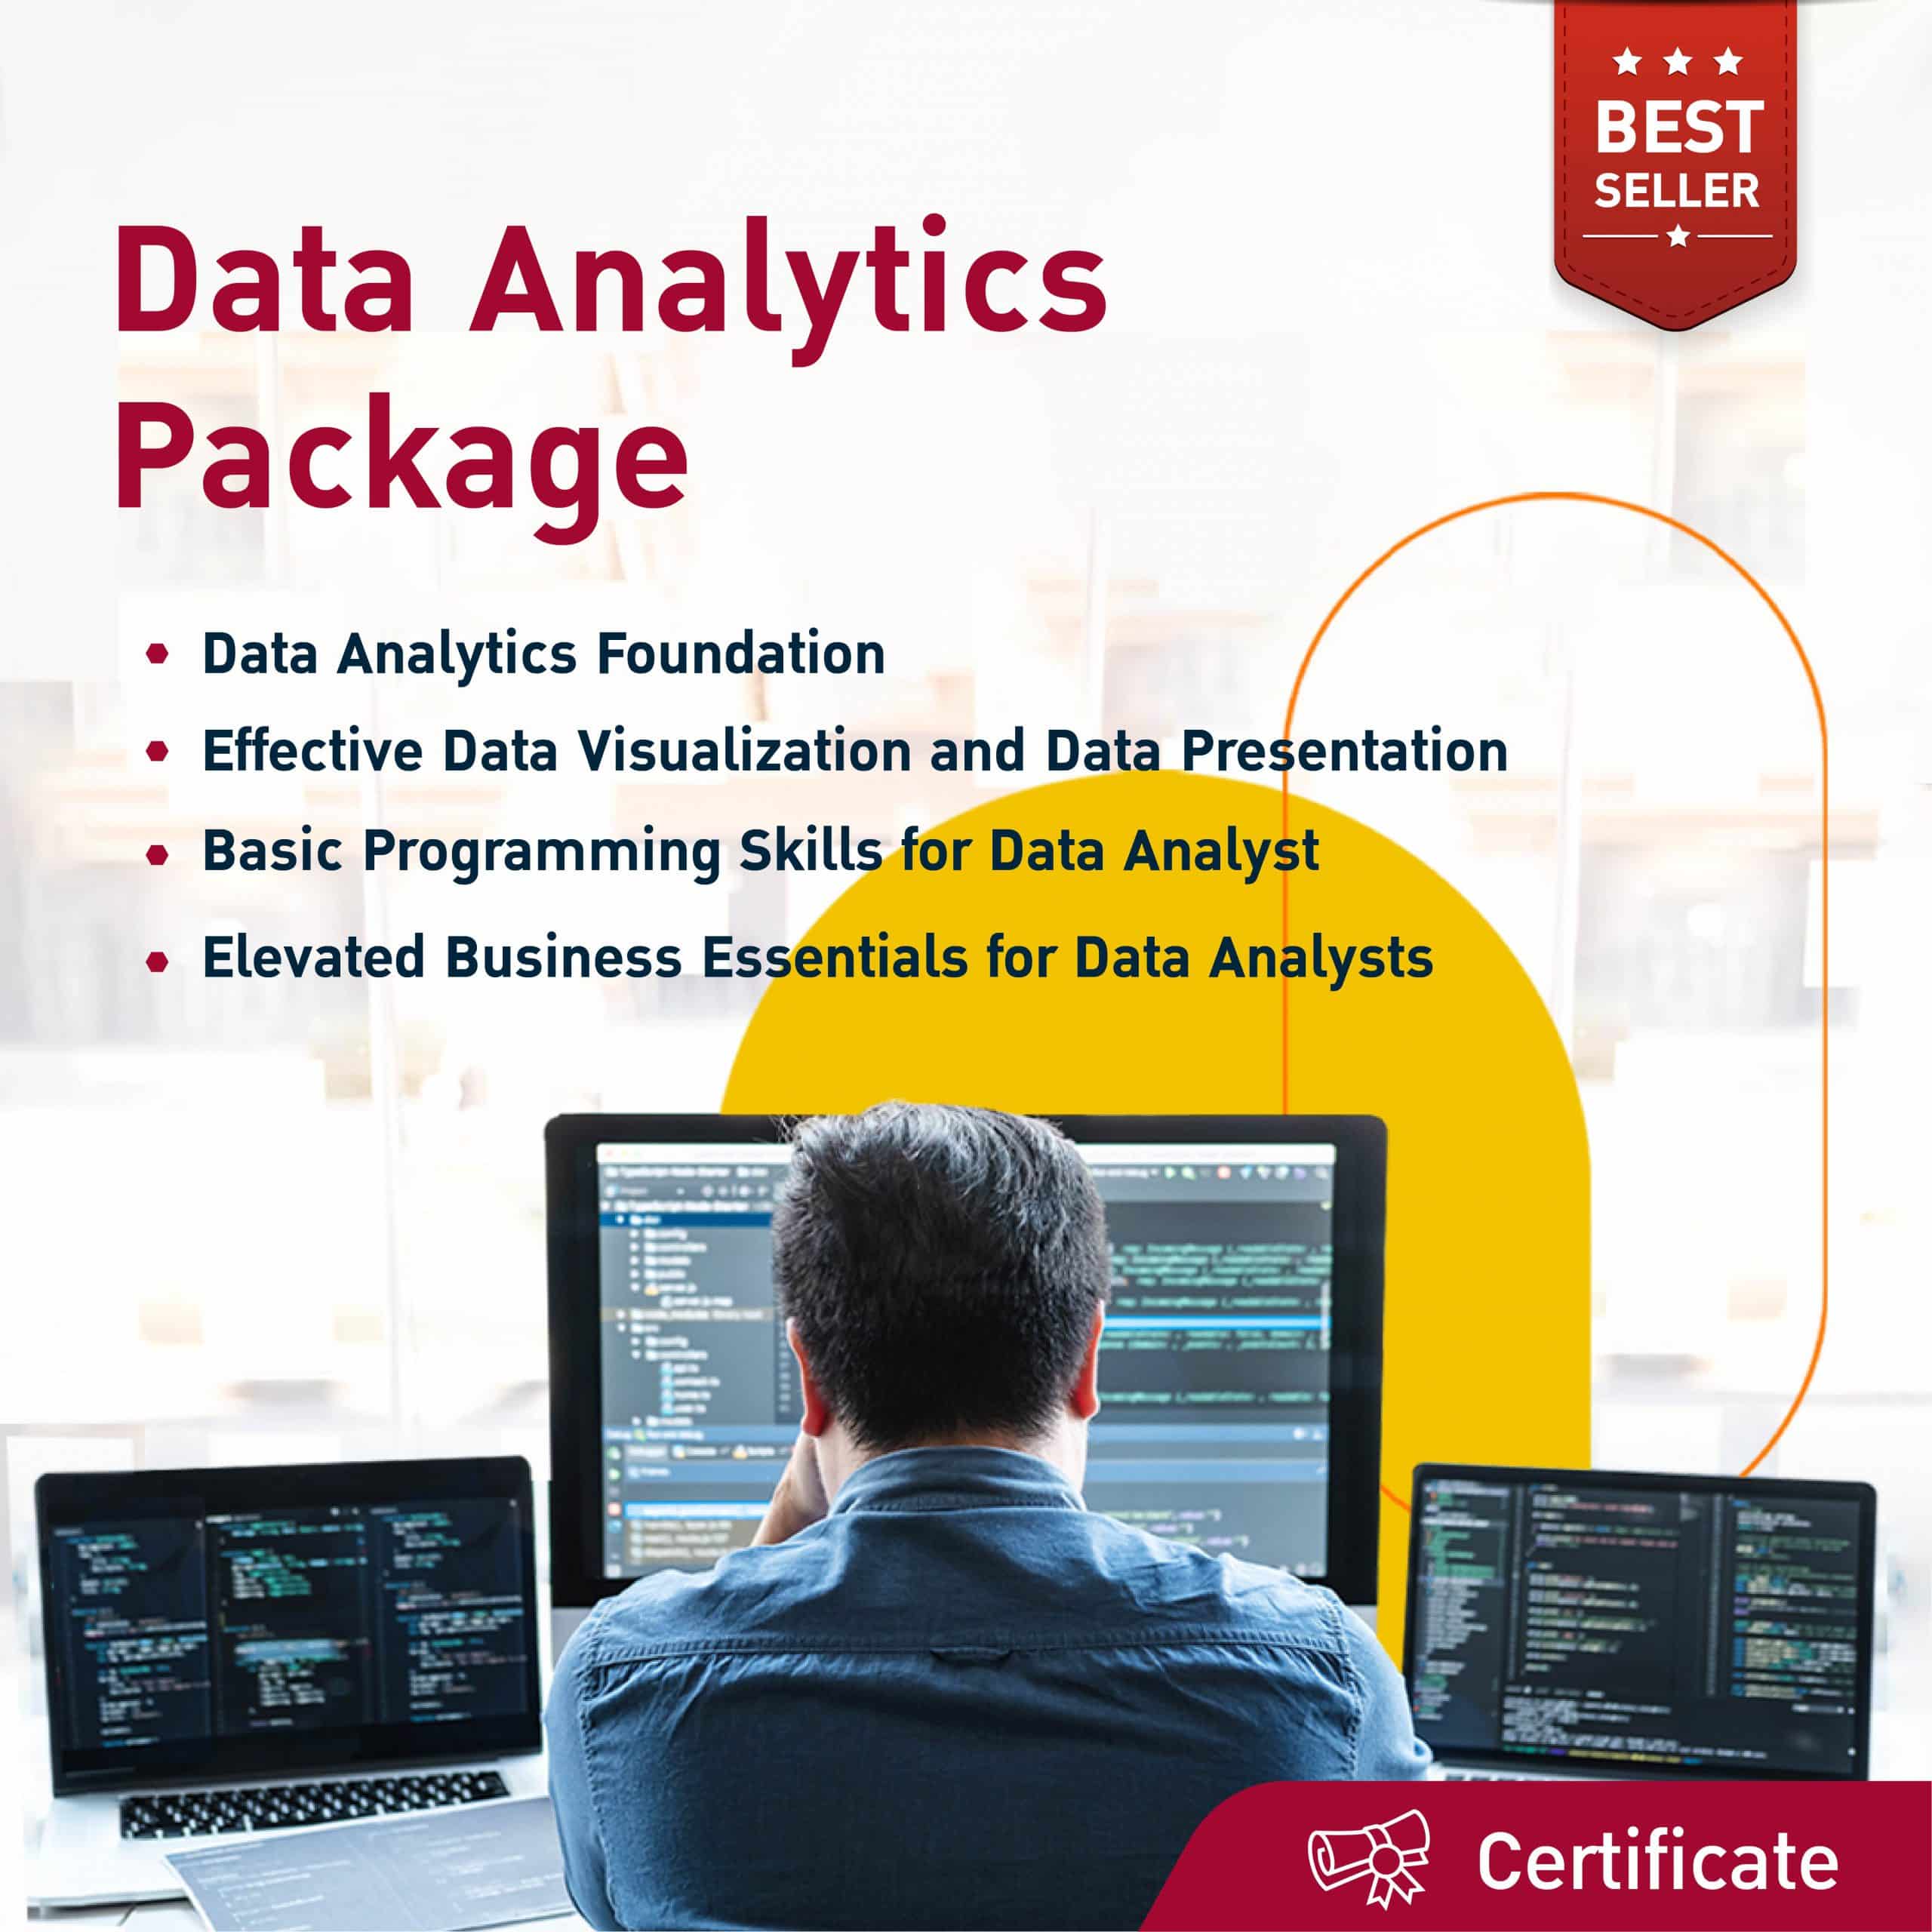 AW_Jobs Base Learning_Data Analytics Package_1080x1080 (2)